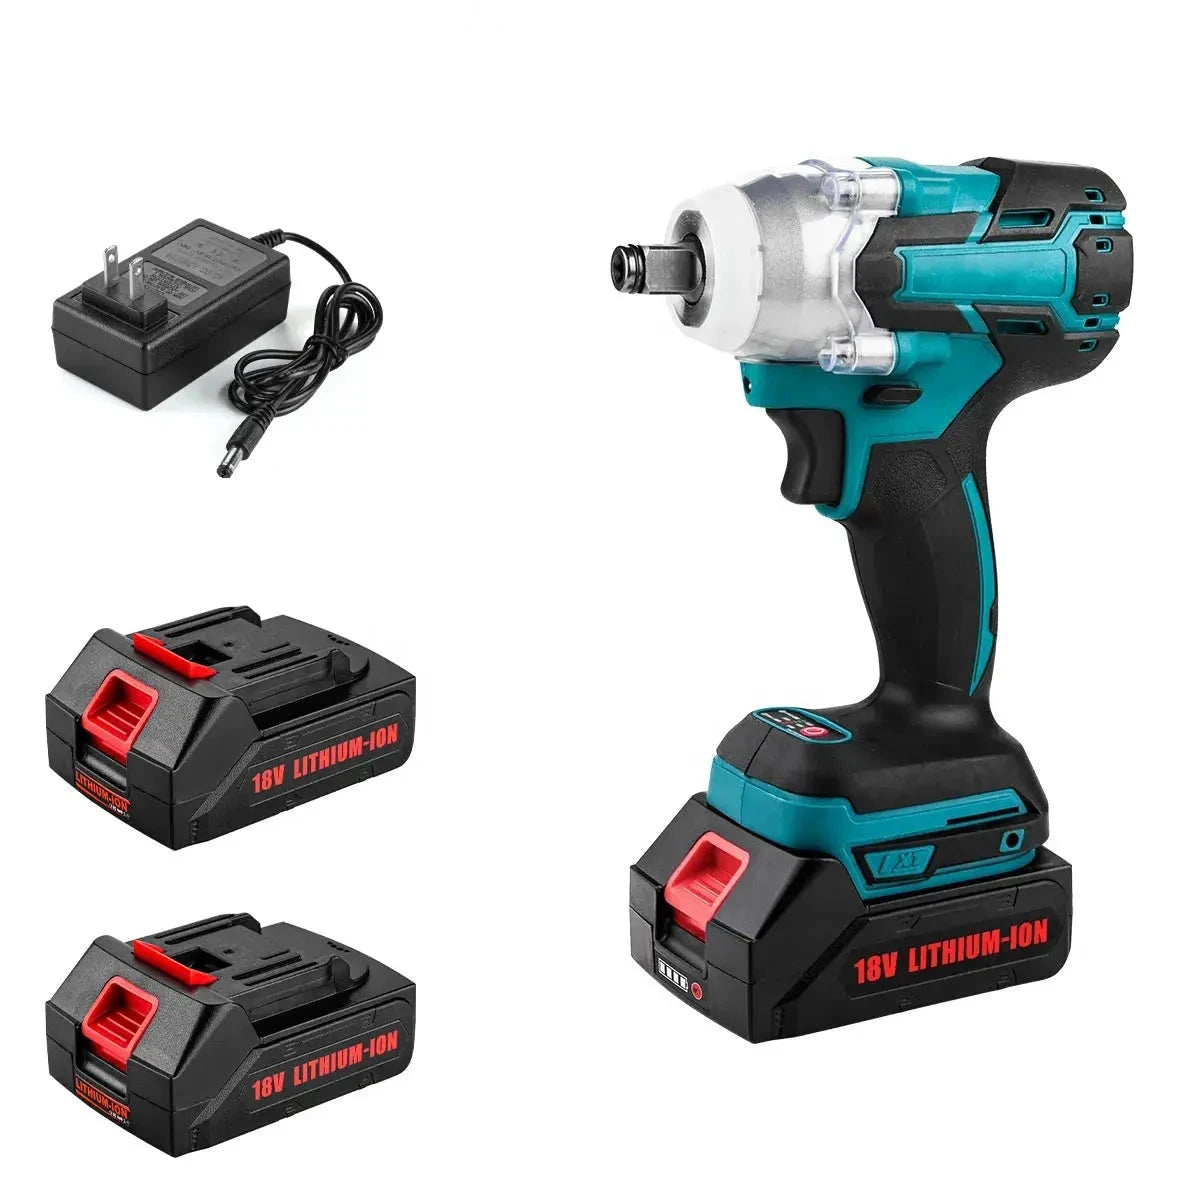 520N.M Brushless Electric Impact Wrench Cordless Electric Wrench 1/2 inch for Makita 21V Battery Screwdriver Power Tools BrothersCarCare